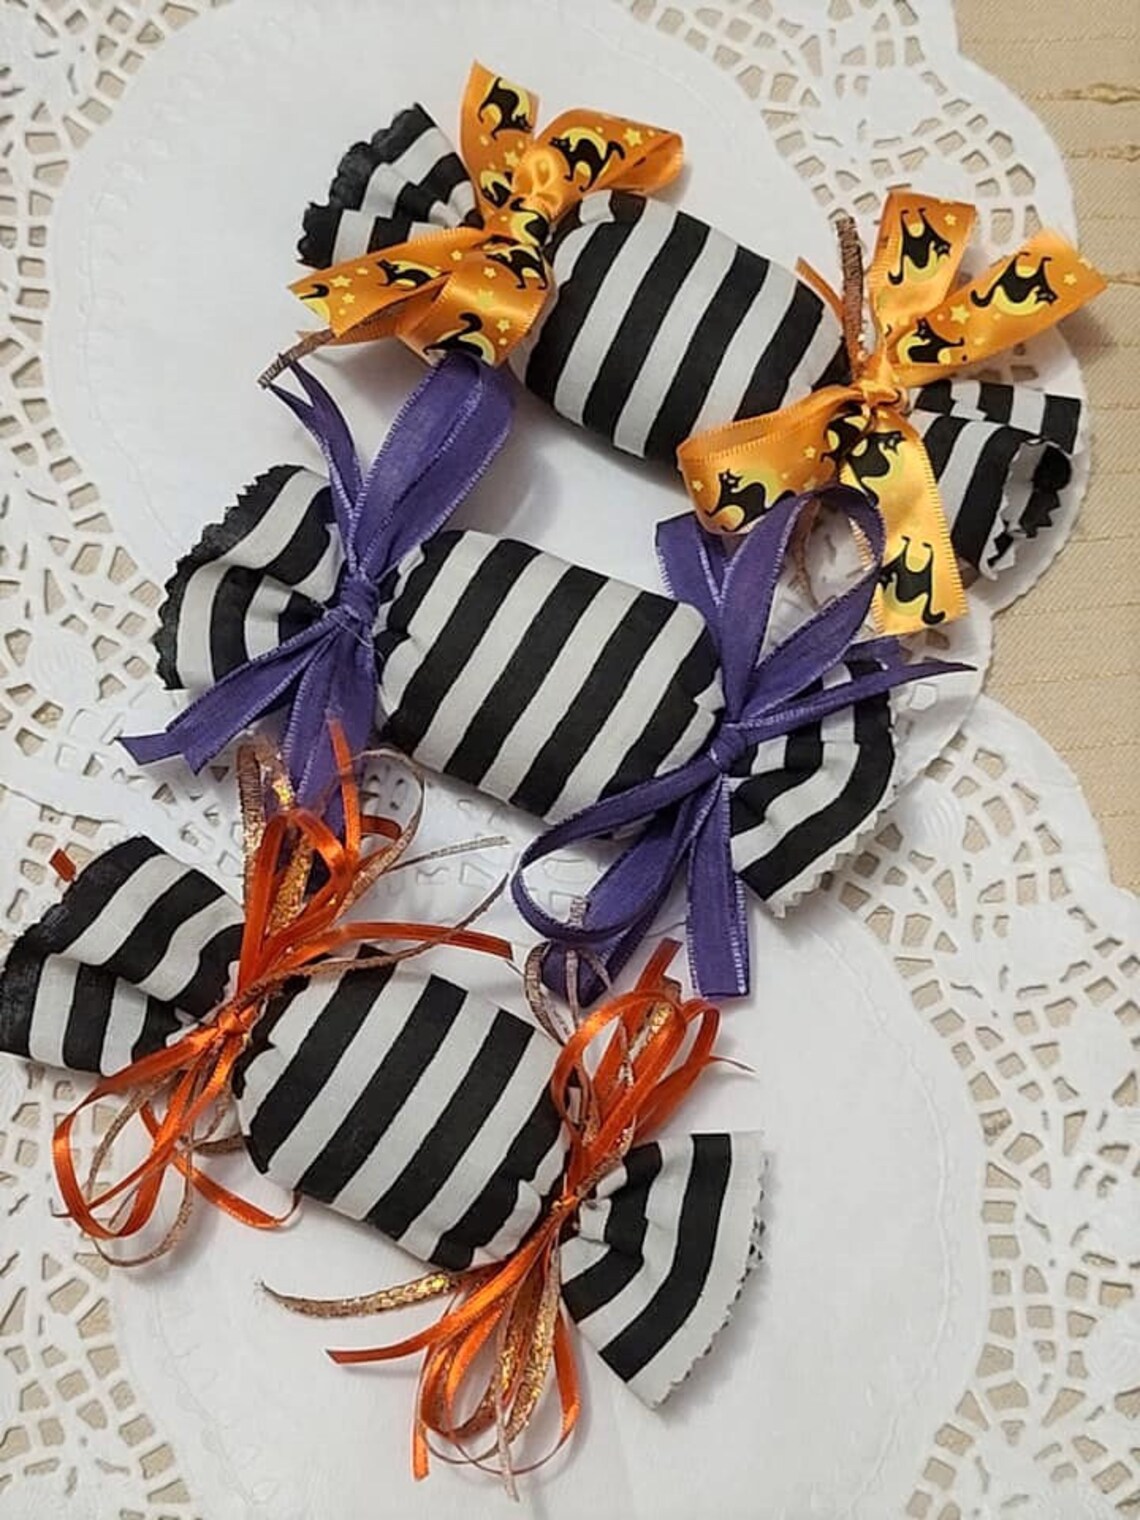 Bowl filler candy ornaments set of 3 Halloween mixed color bows